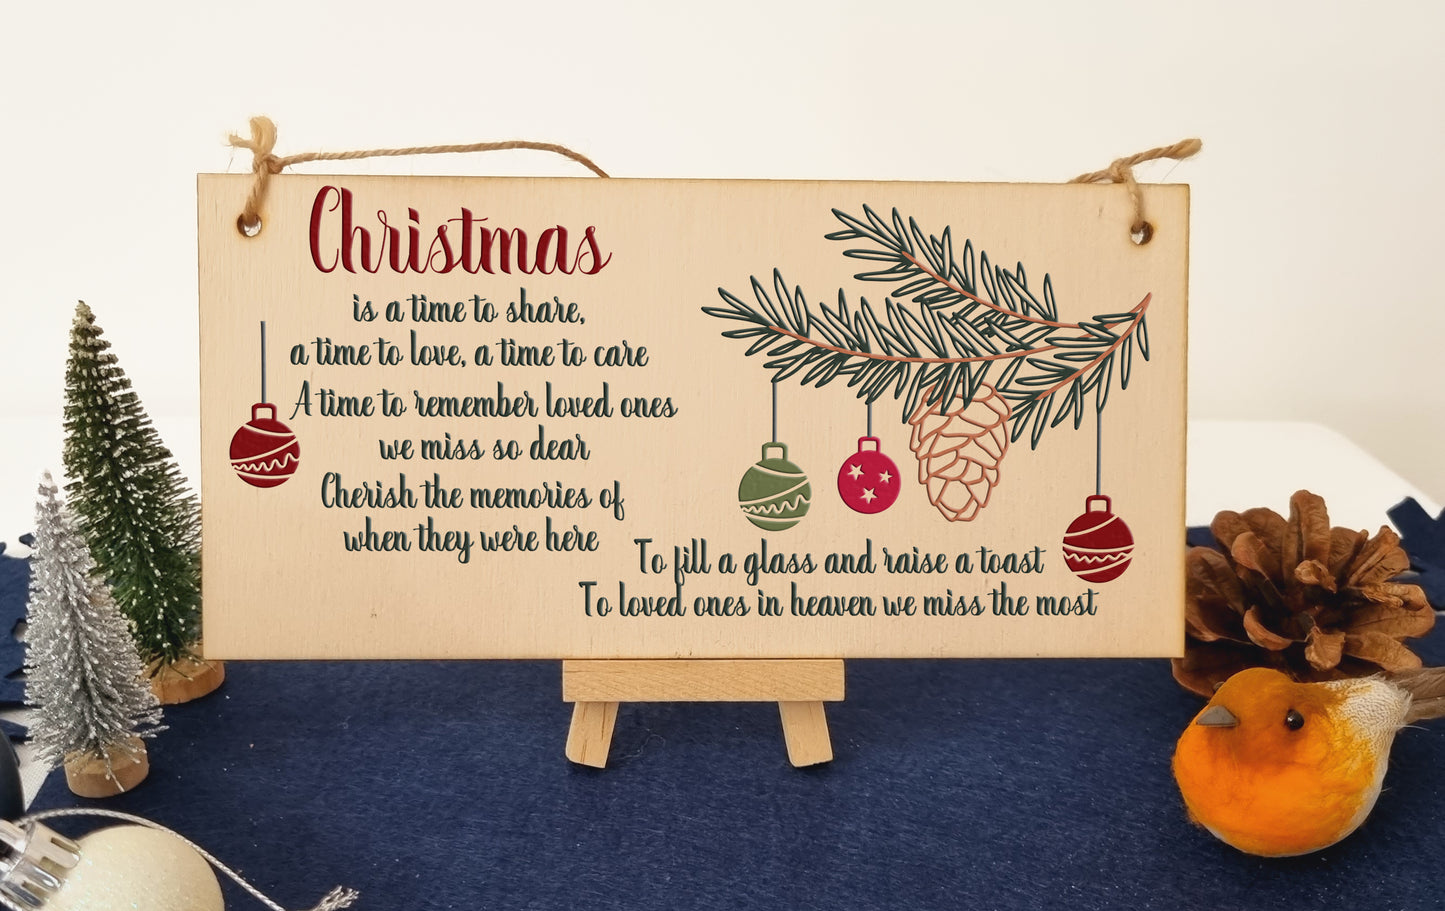 Christmas Time to Share Remember Loved Ones Sympathy Remembrance Decorative Sign Handmade Wooden Hanging Wall Plaque Gift